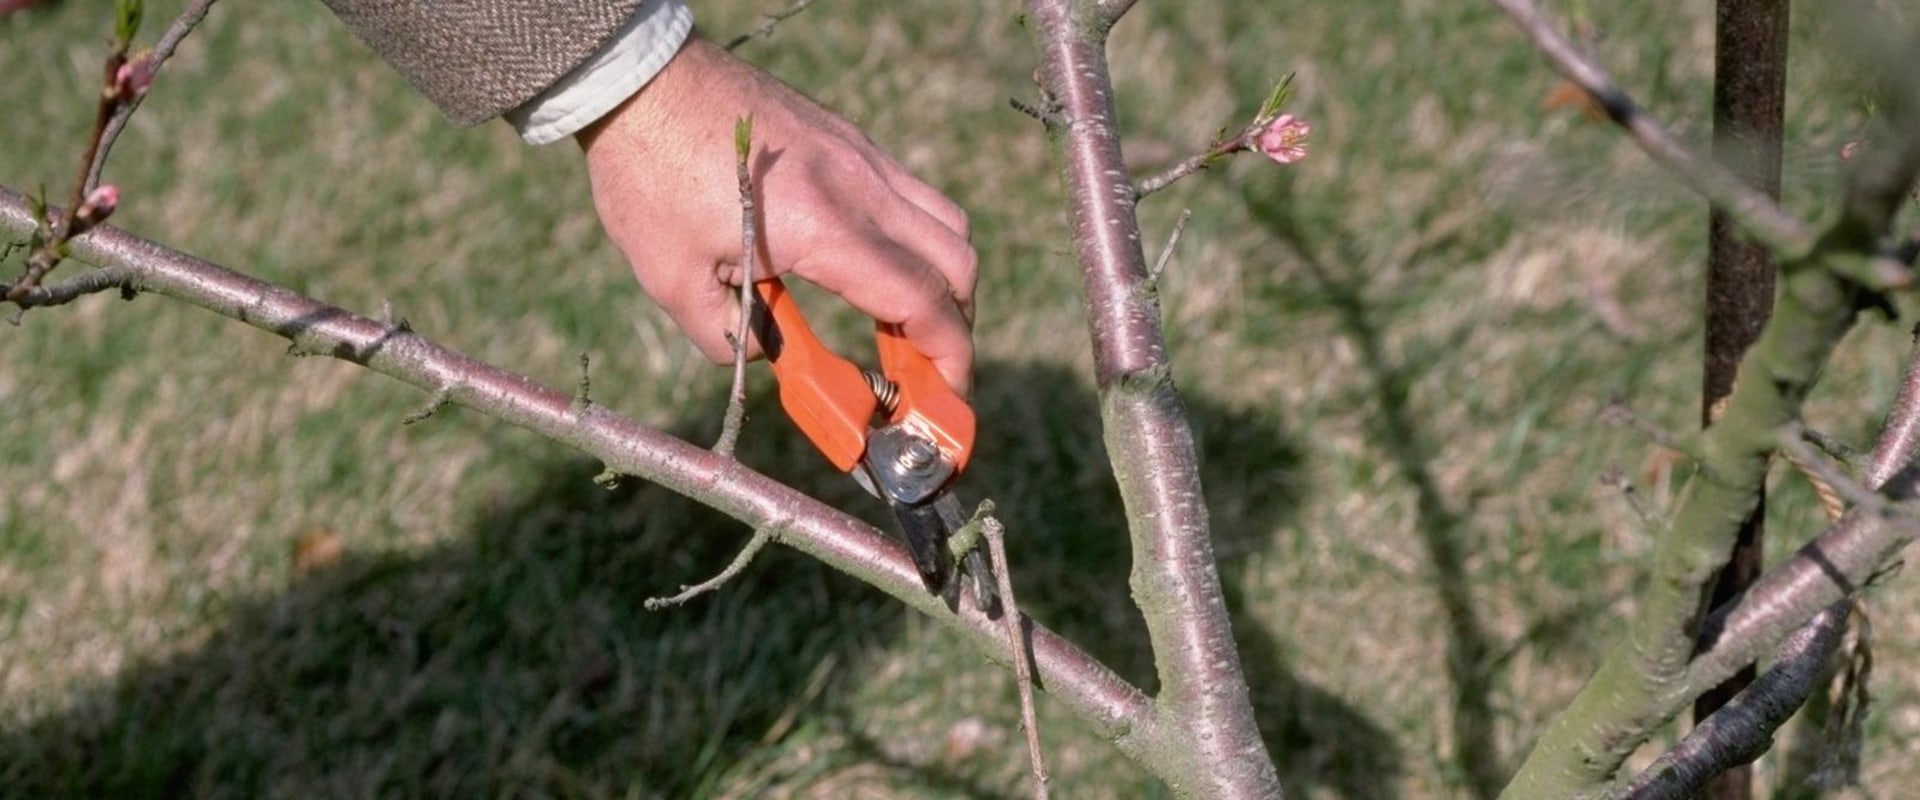 How to Prune Trees Correctly